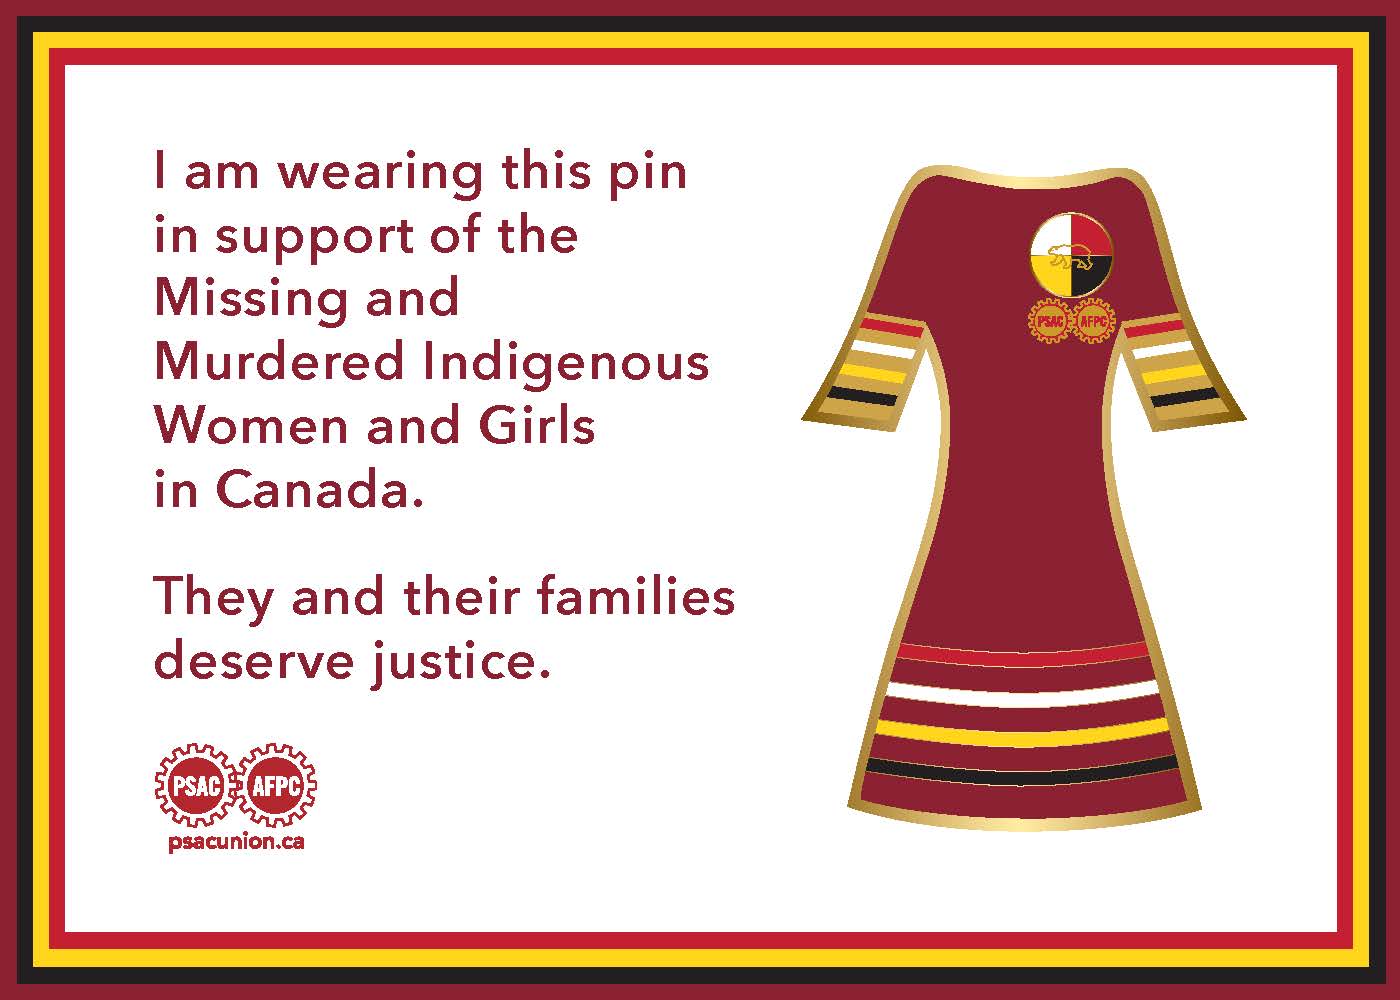 Red Dress Campaign in Solidarity with Missing and Murdered Indigenous Women